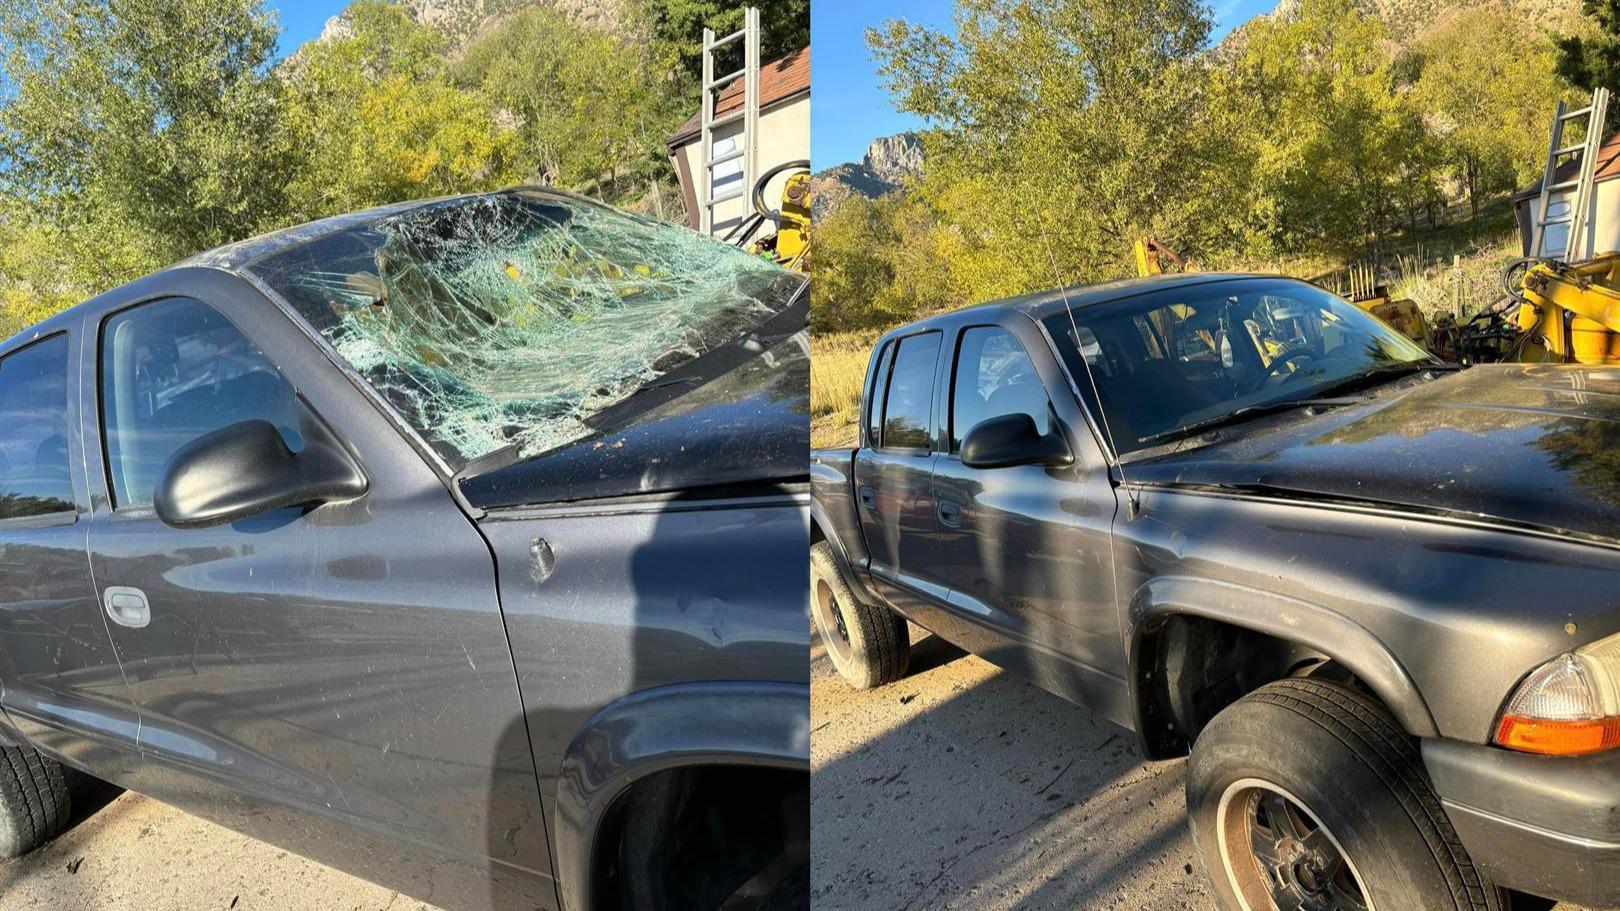 For those unfortunate moments when you find yourself with broken auto glass, rely on ATC Auto Glass to provide swift and expert assistance. Our owner-operated service ensures that you receive immediate attention to replace or repair your broken auto glass, so you can get back on the road safely.